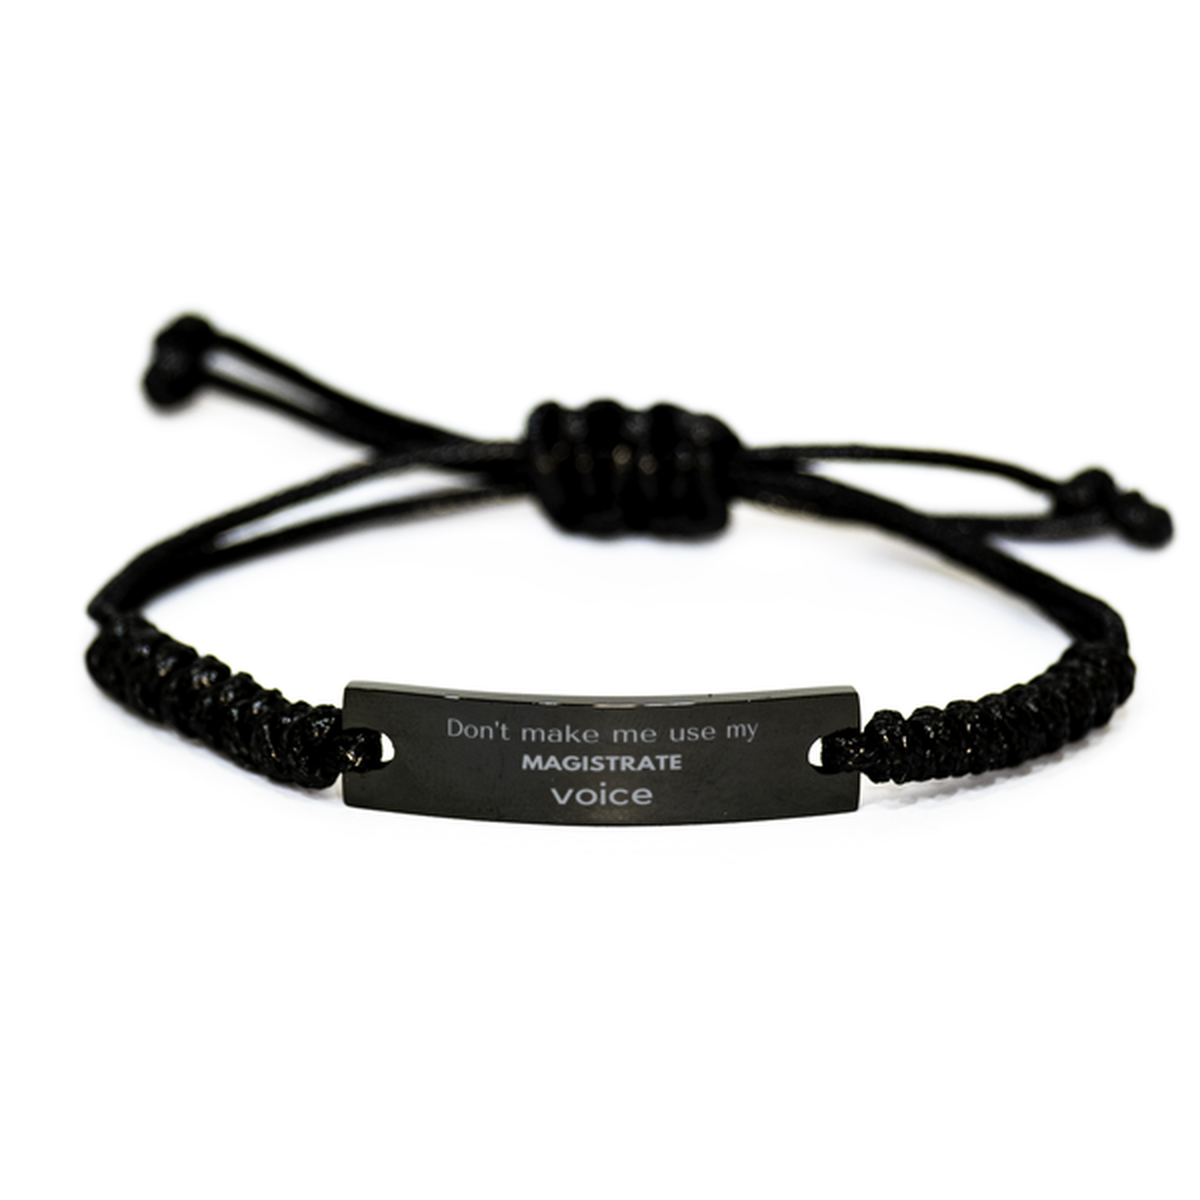 Don't make me use my Magistrate voice, Sarcasm Magistrate Gifts, Christmas Magistrate Black Rope Bracelet Birthday Unique Gifts For Magistrate Coworkers, Men, Women, Colleague, Friends